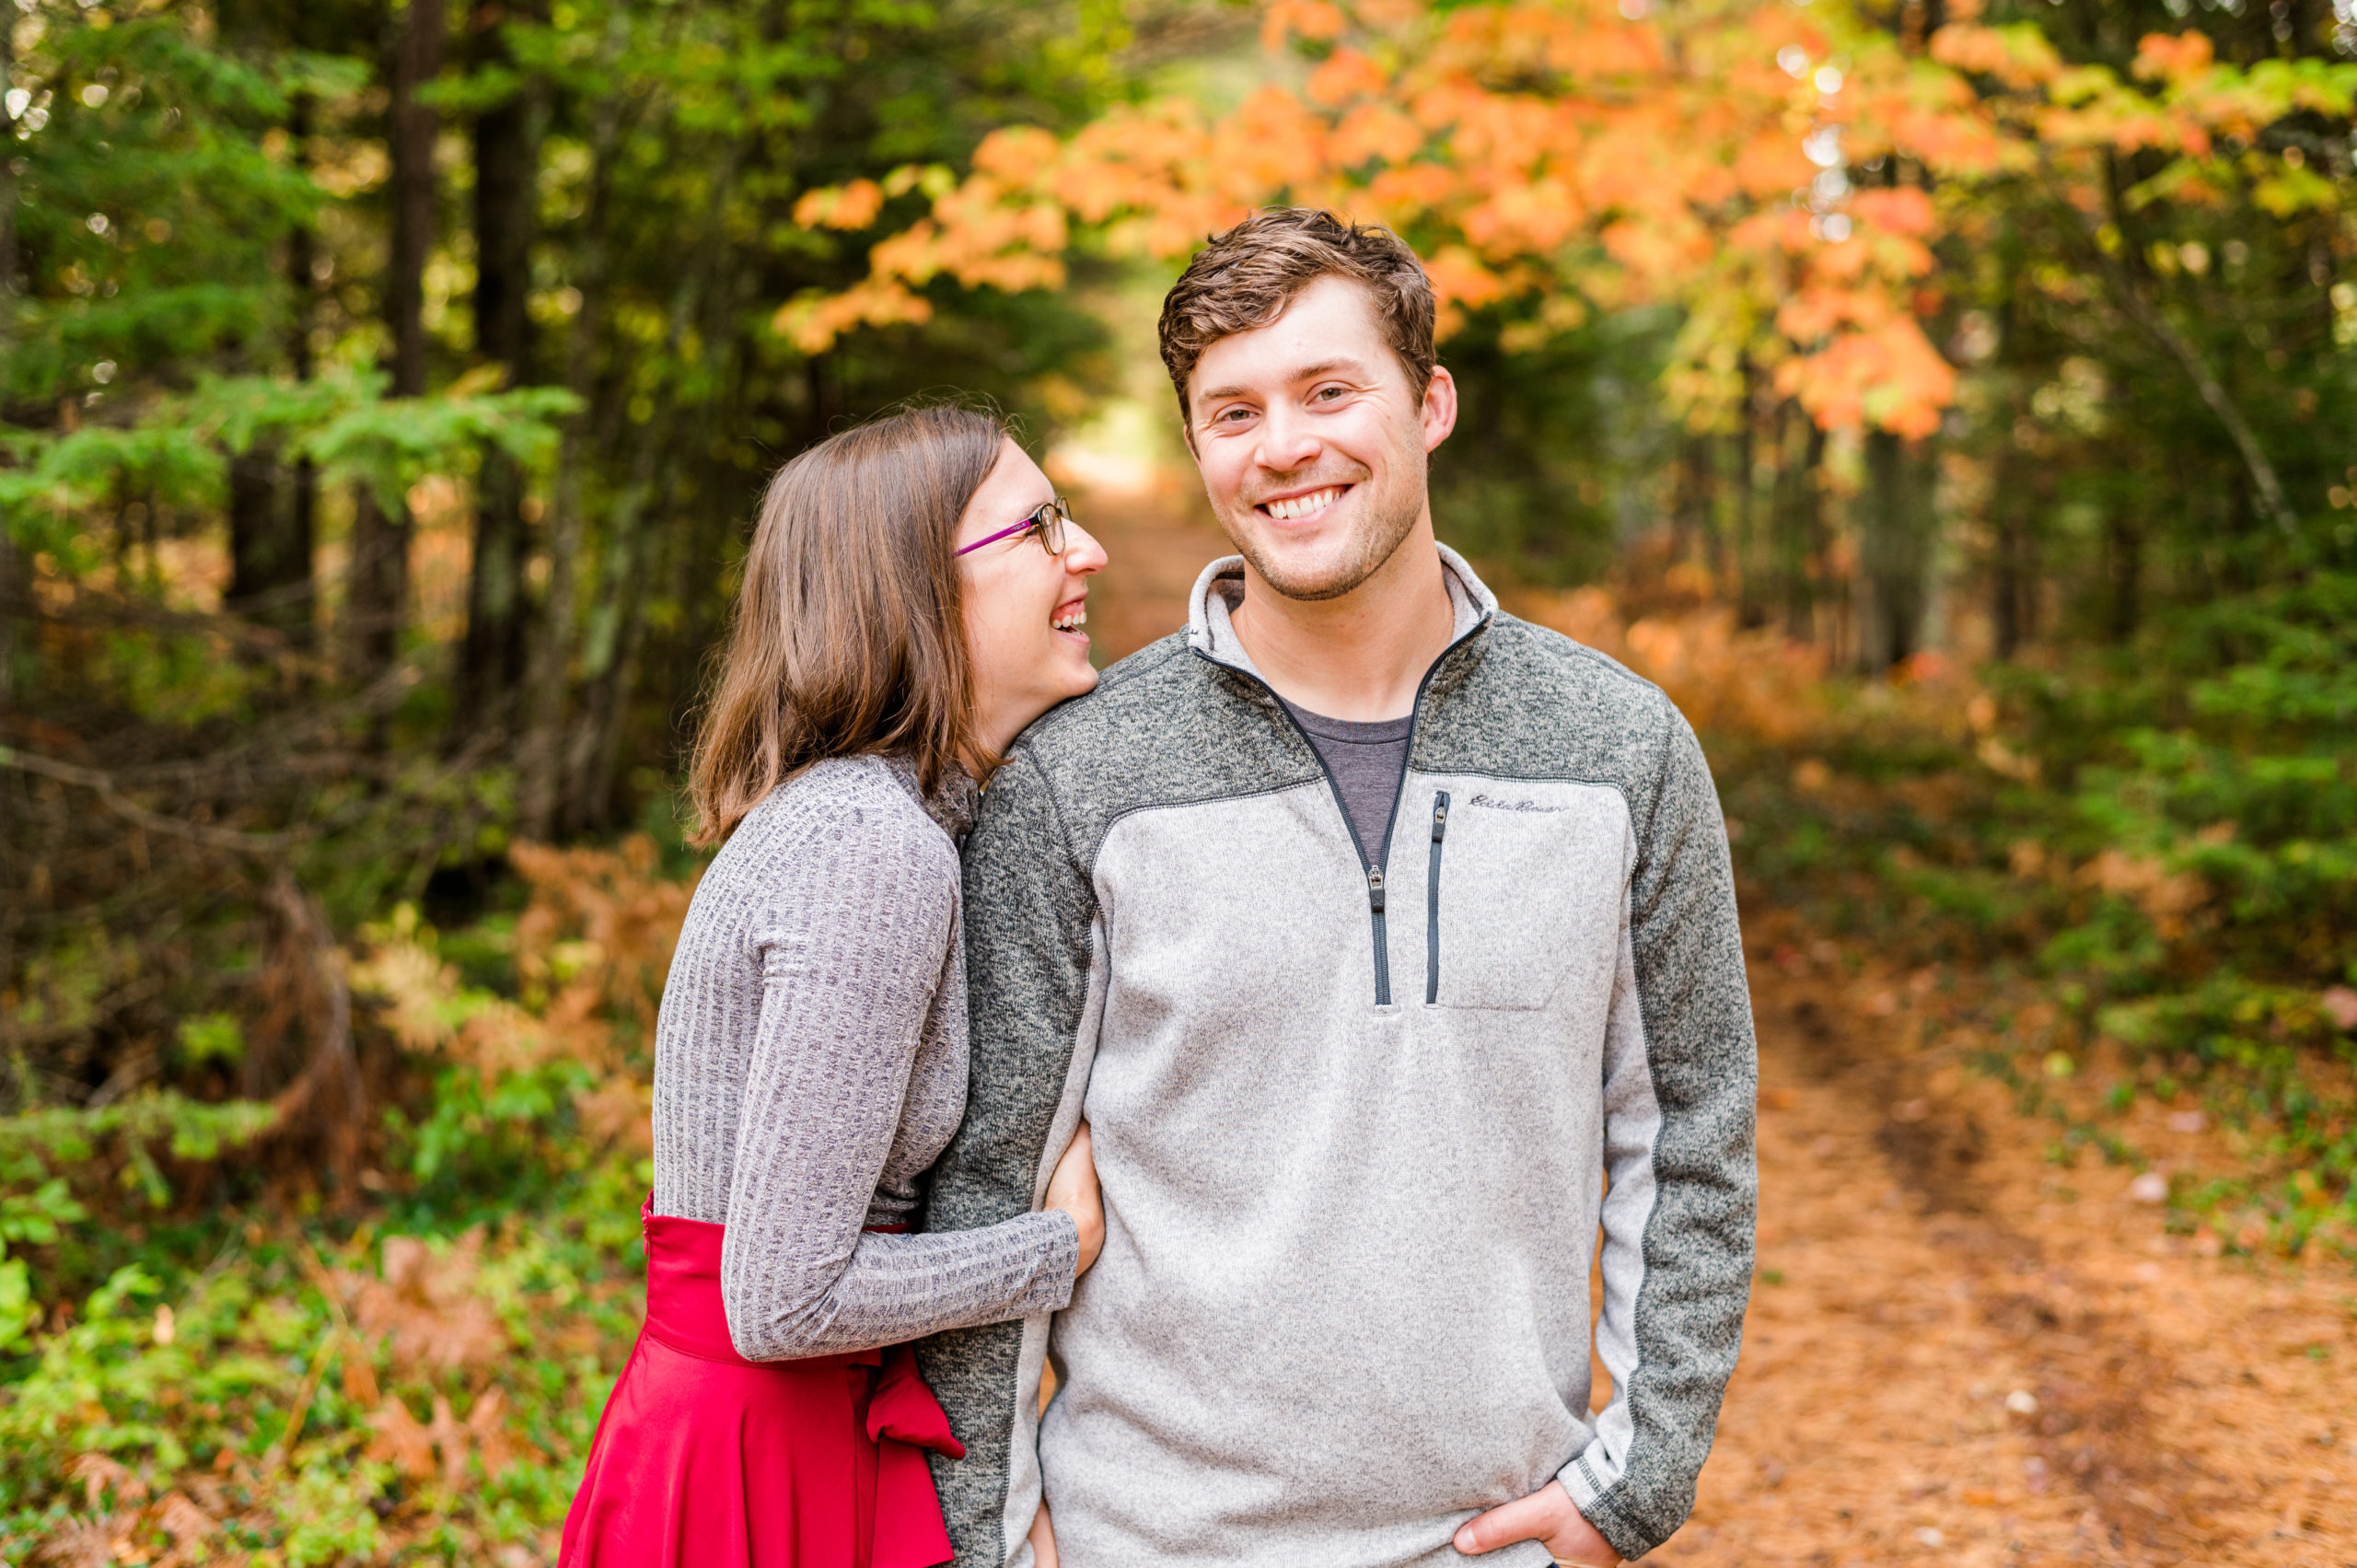 Fall Bayfield Engagement Session_Erica Johanna Photography